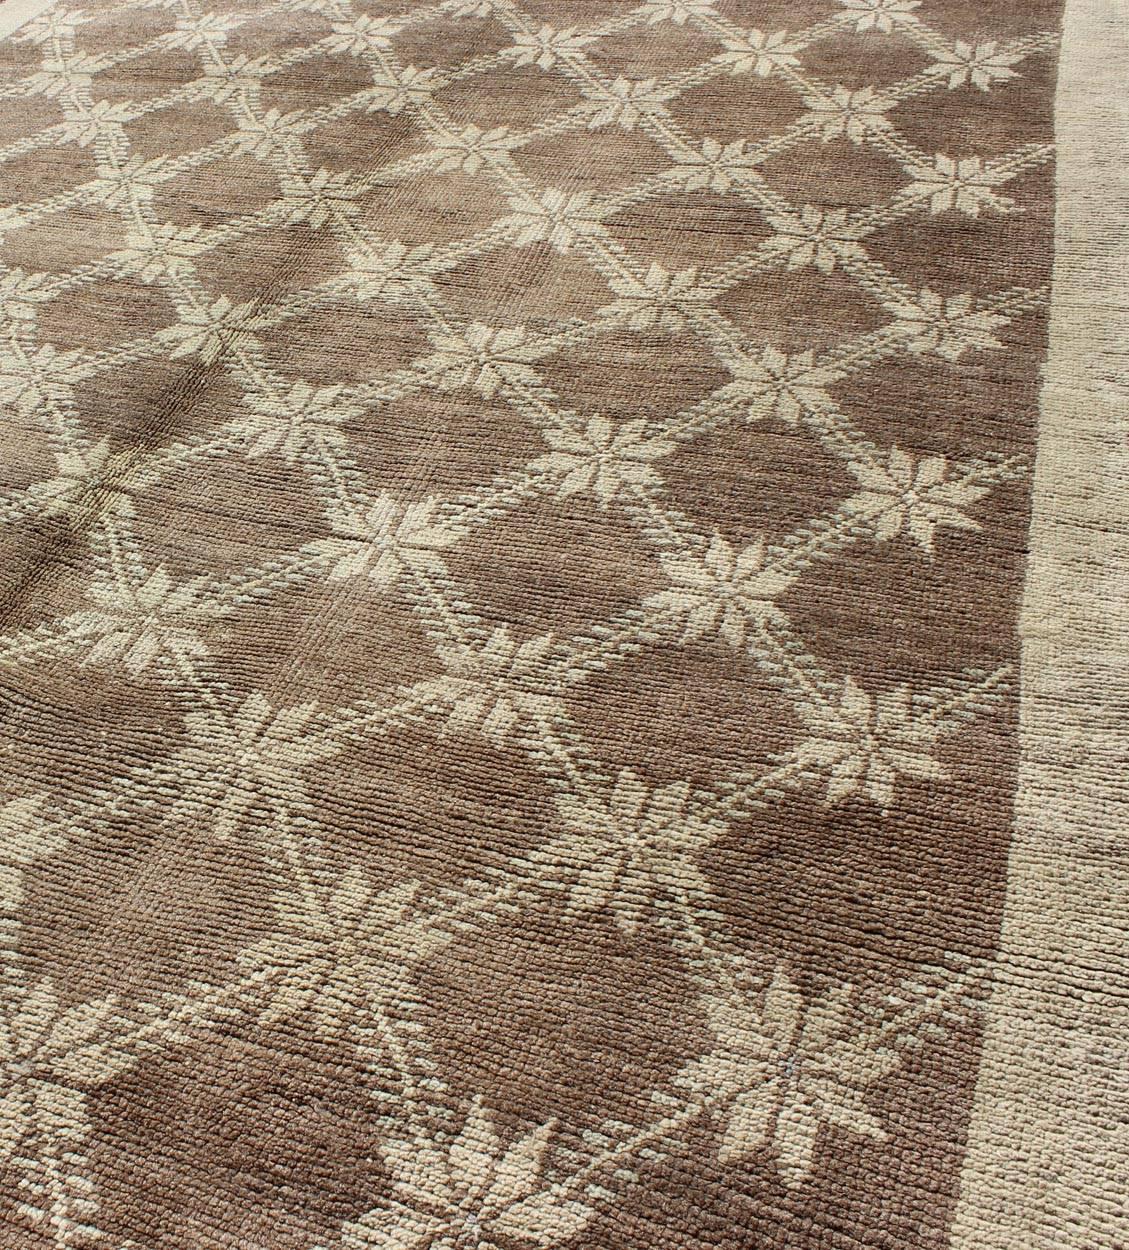 Mid-20th Century Vintage Turkish Oushak Runner with Cream Blossoms and Latticework Design For Sale